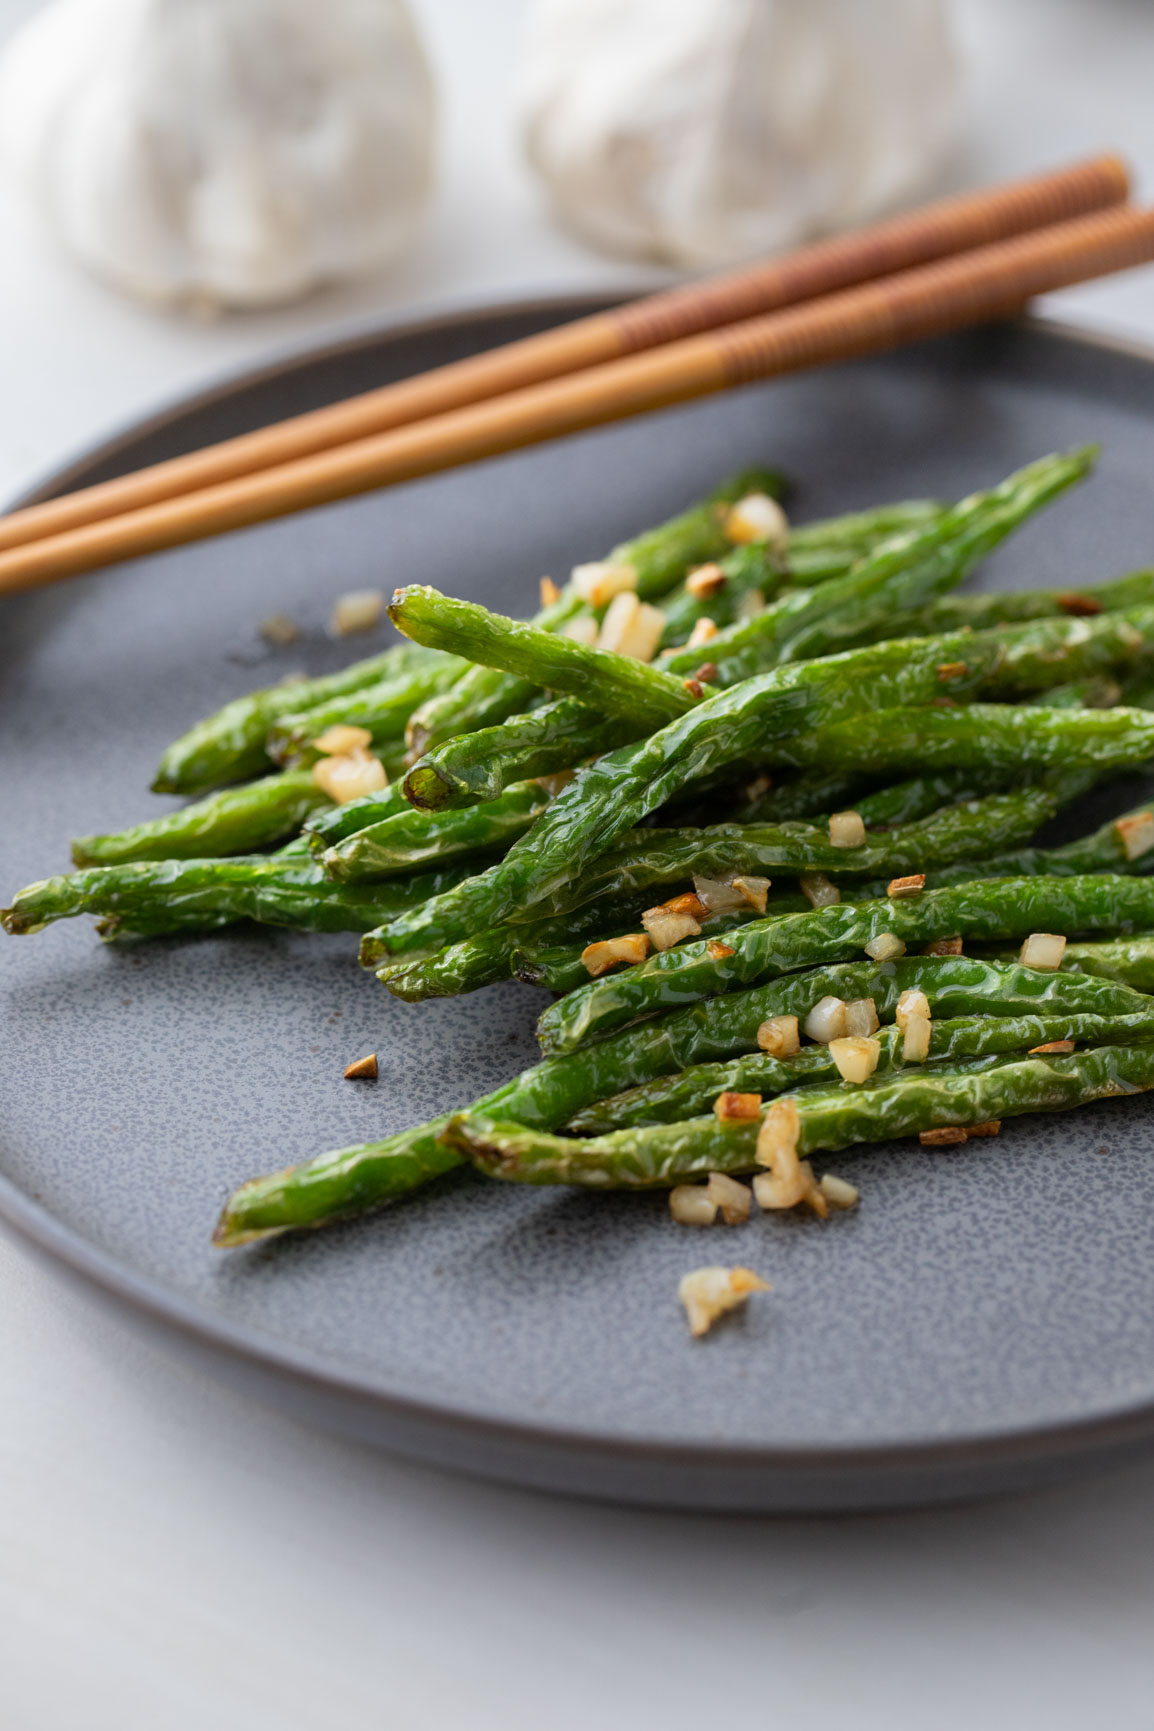 Din Tai Fung Green Beans with garlic on a black plate with a wooden chopsticks